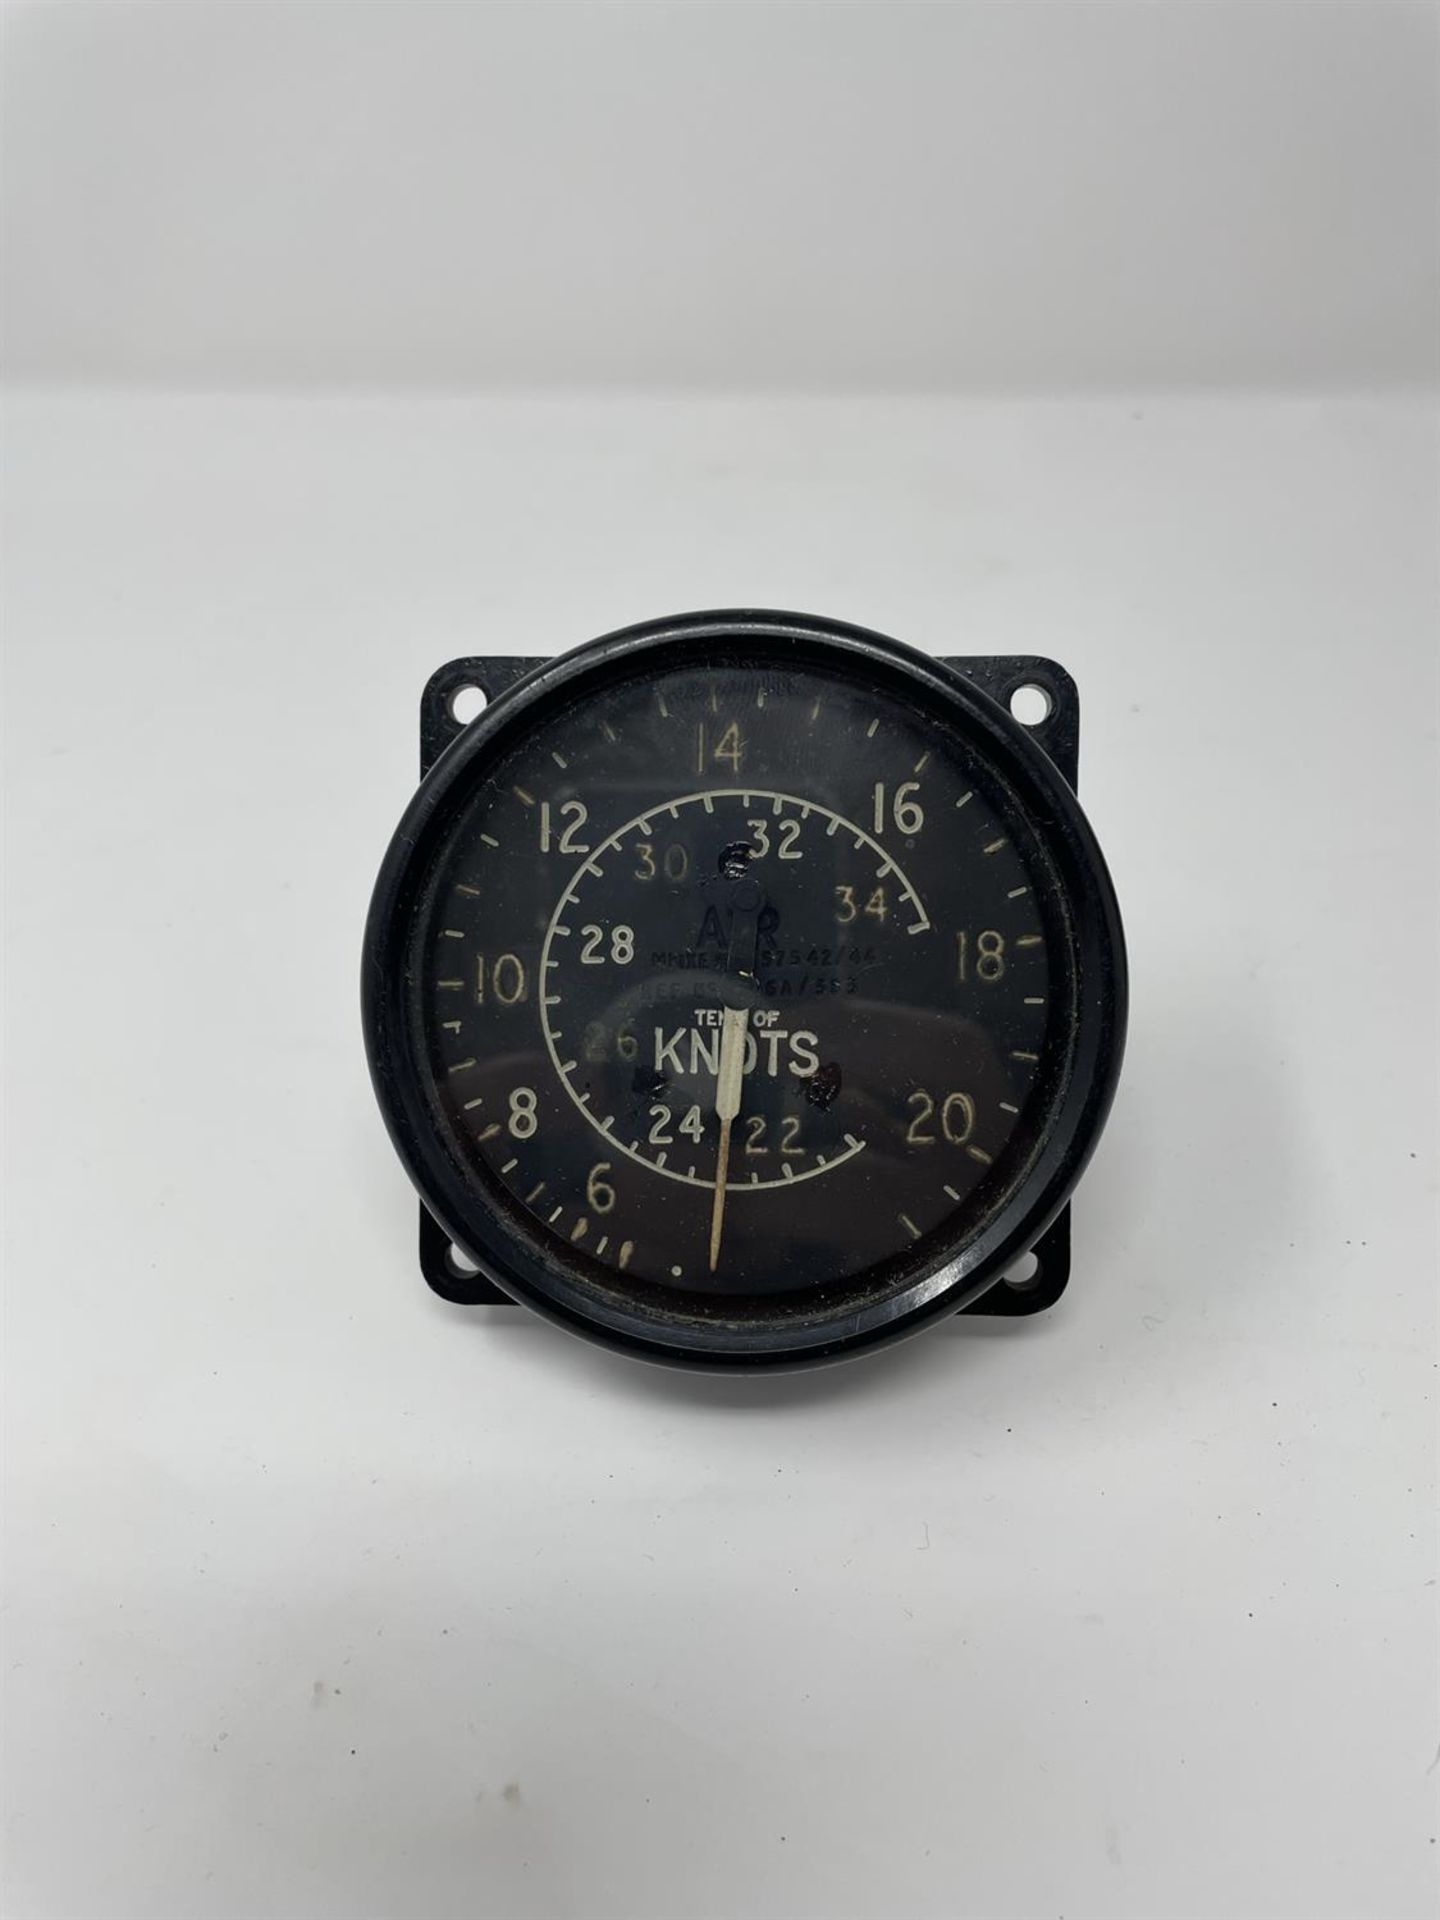 Airspeed Indicator in Knots with Period-Correct Box Dated 1944* - Image 2 of 10